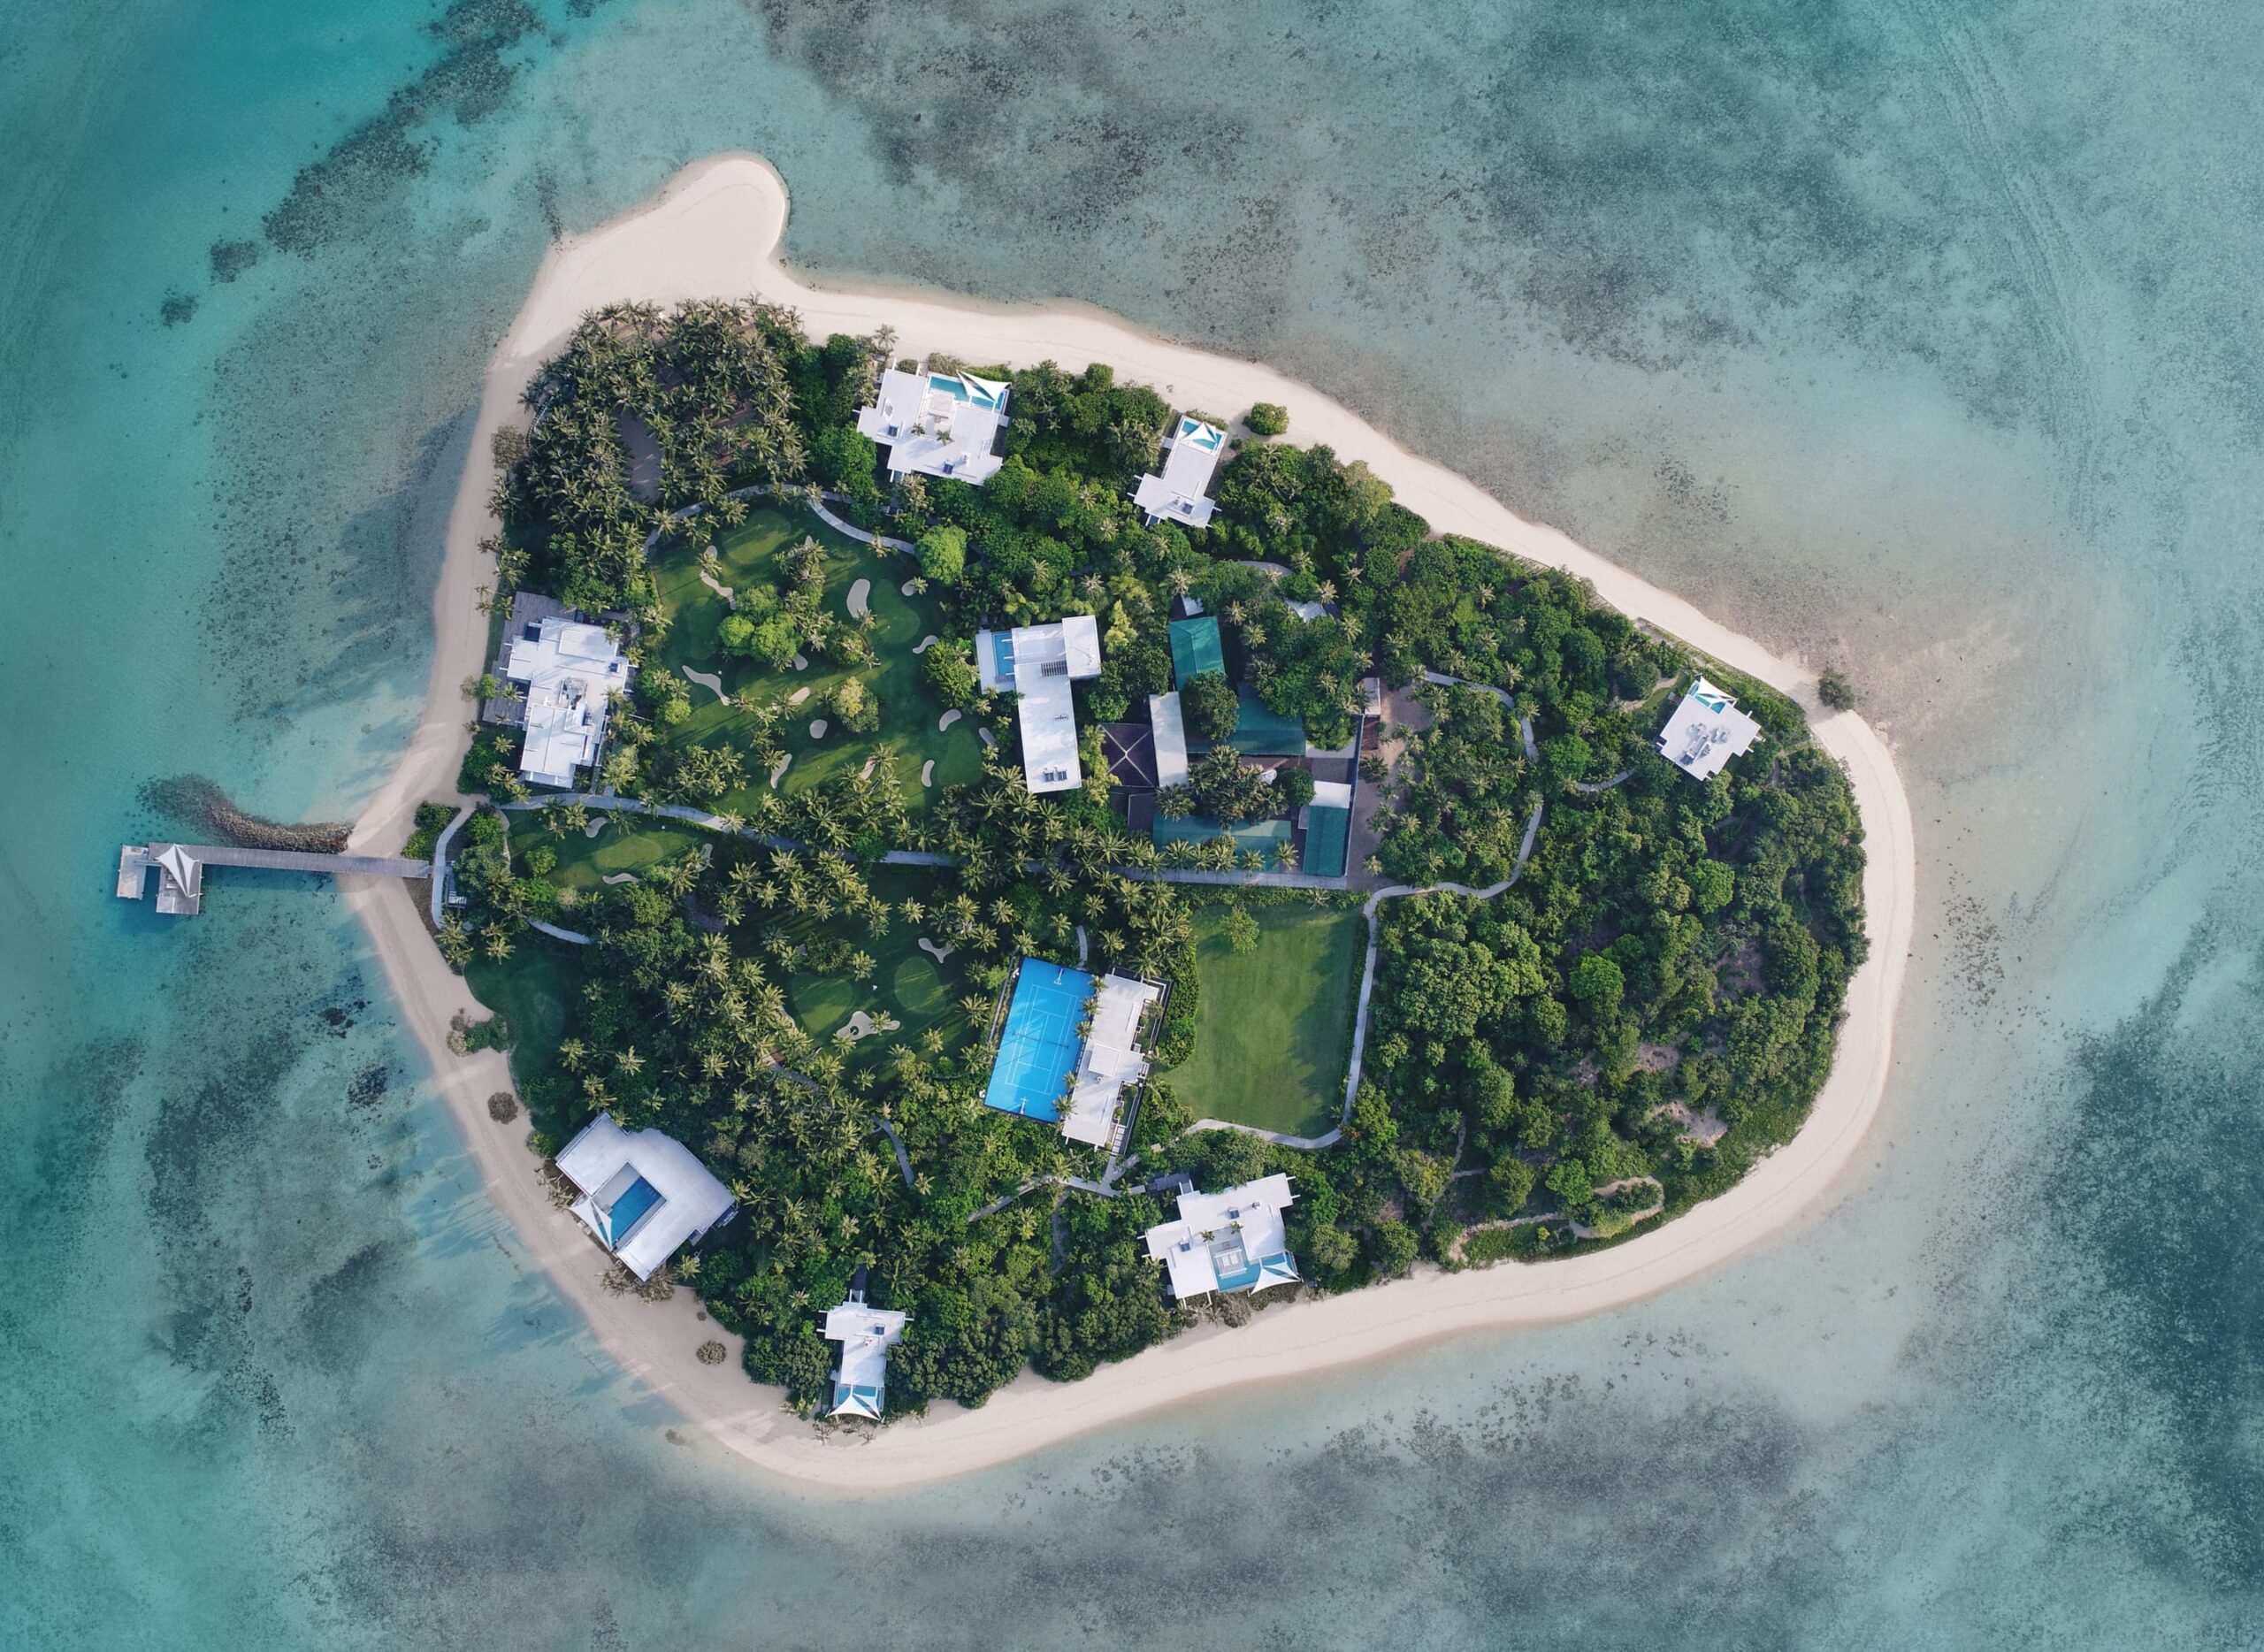 Banwa Private Island in the Philippines is the most expensive and exclusive resort in the world. The Tranquillity That Would Cost You $100,000